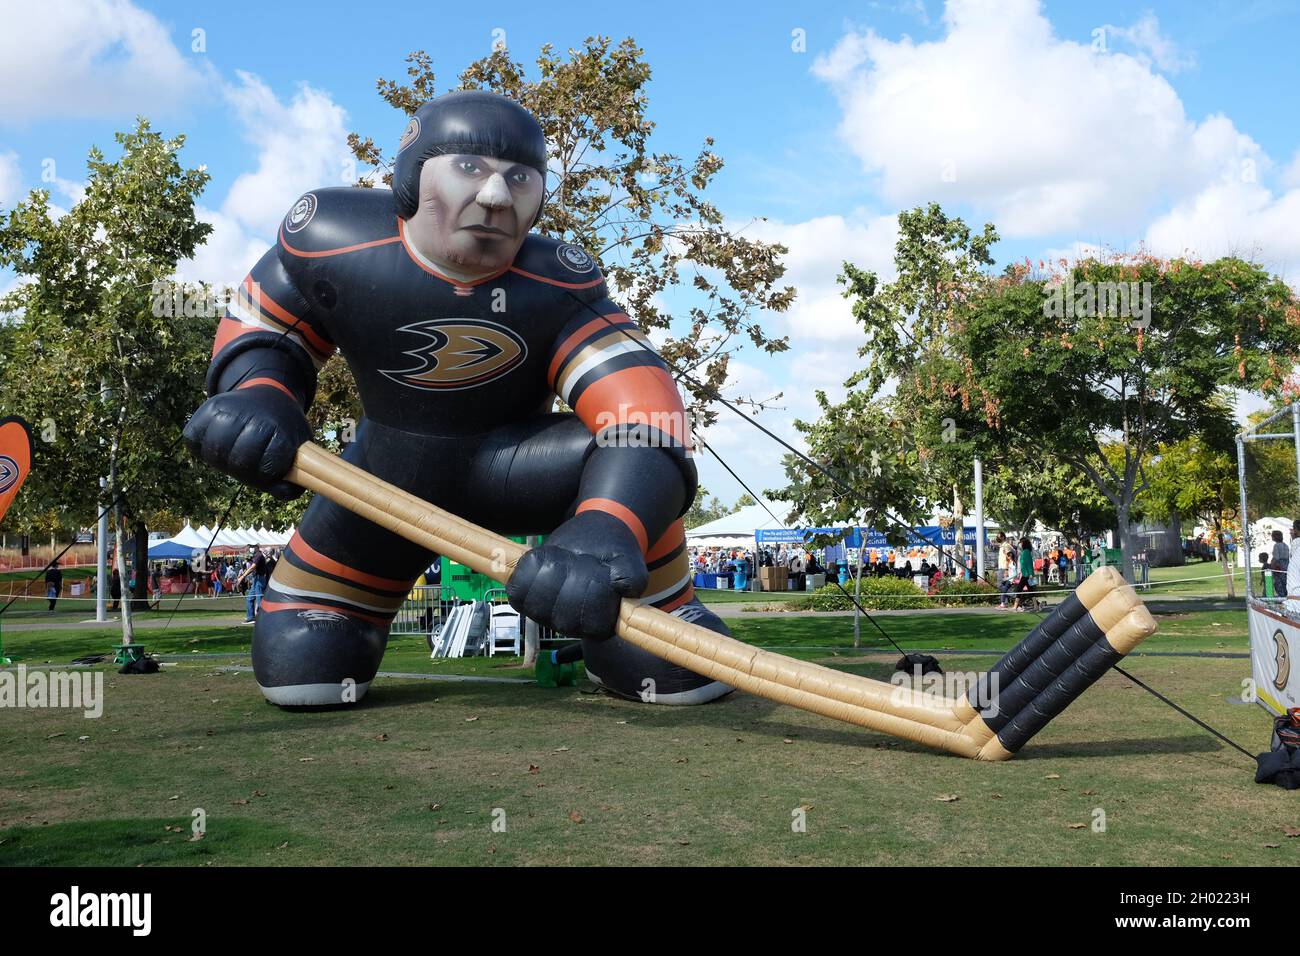 IRVINE, CALIFORNIA - 9 OCT 2021: A inflatable Anaheim Ducks Hockey Player at the Irvine Global Village Festival, an annual event held at the Great Par Stock Photo